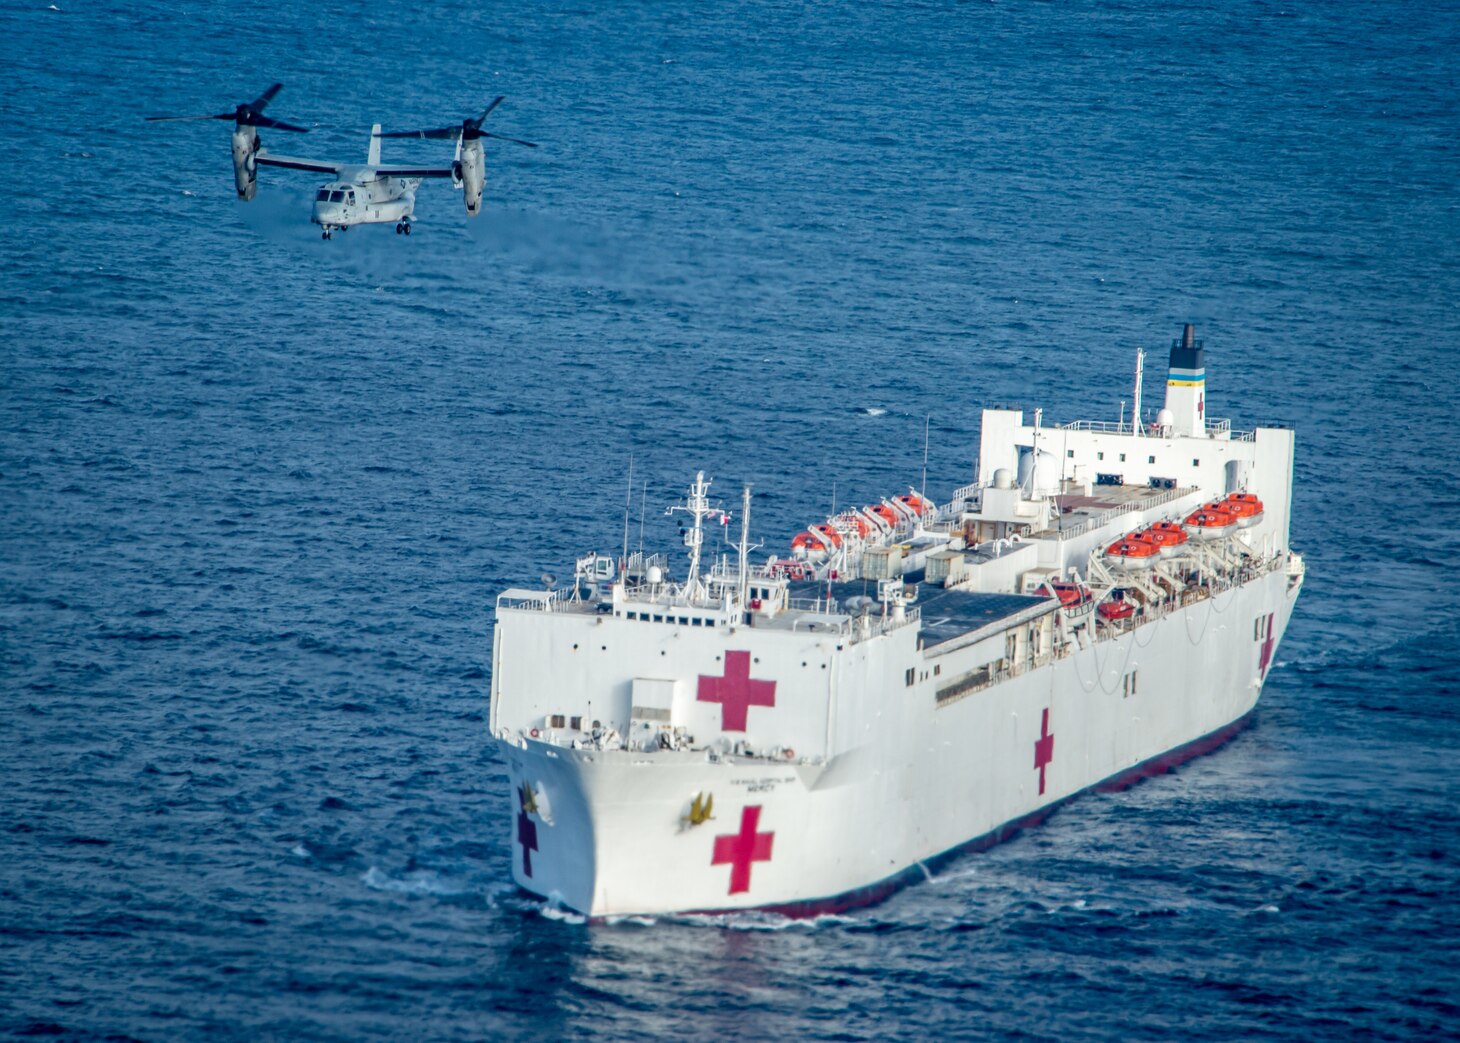 The Military Sealift Command hospital ship USNS Mercy (T-AH 19) during Mercy Exercise (MERCEX) 22-1 in the Pacific Ocean.